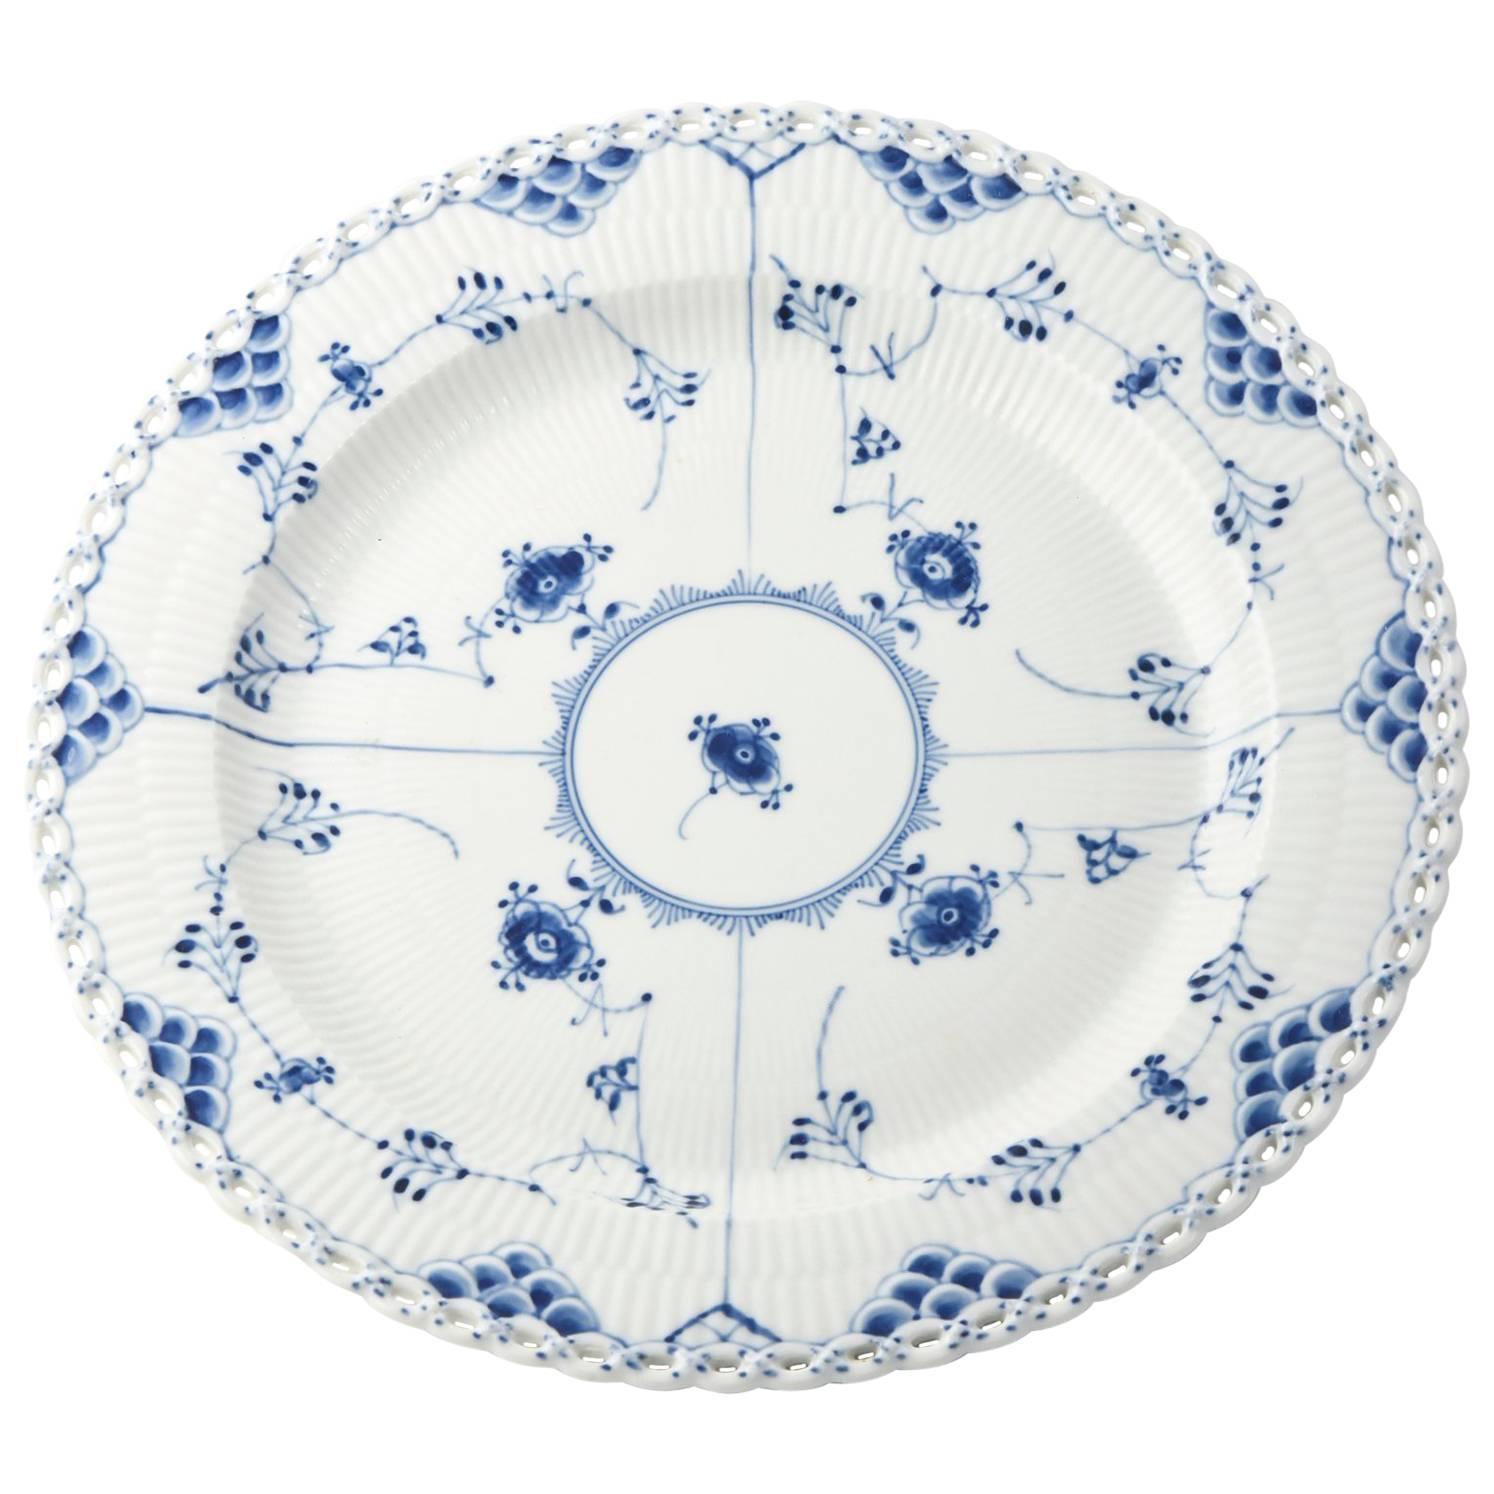 Large Royal Copenhagen Blue and White Fluted Lace Pattern Floral Platter